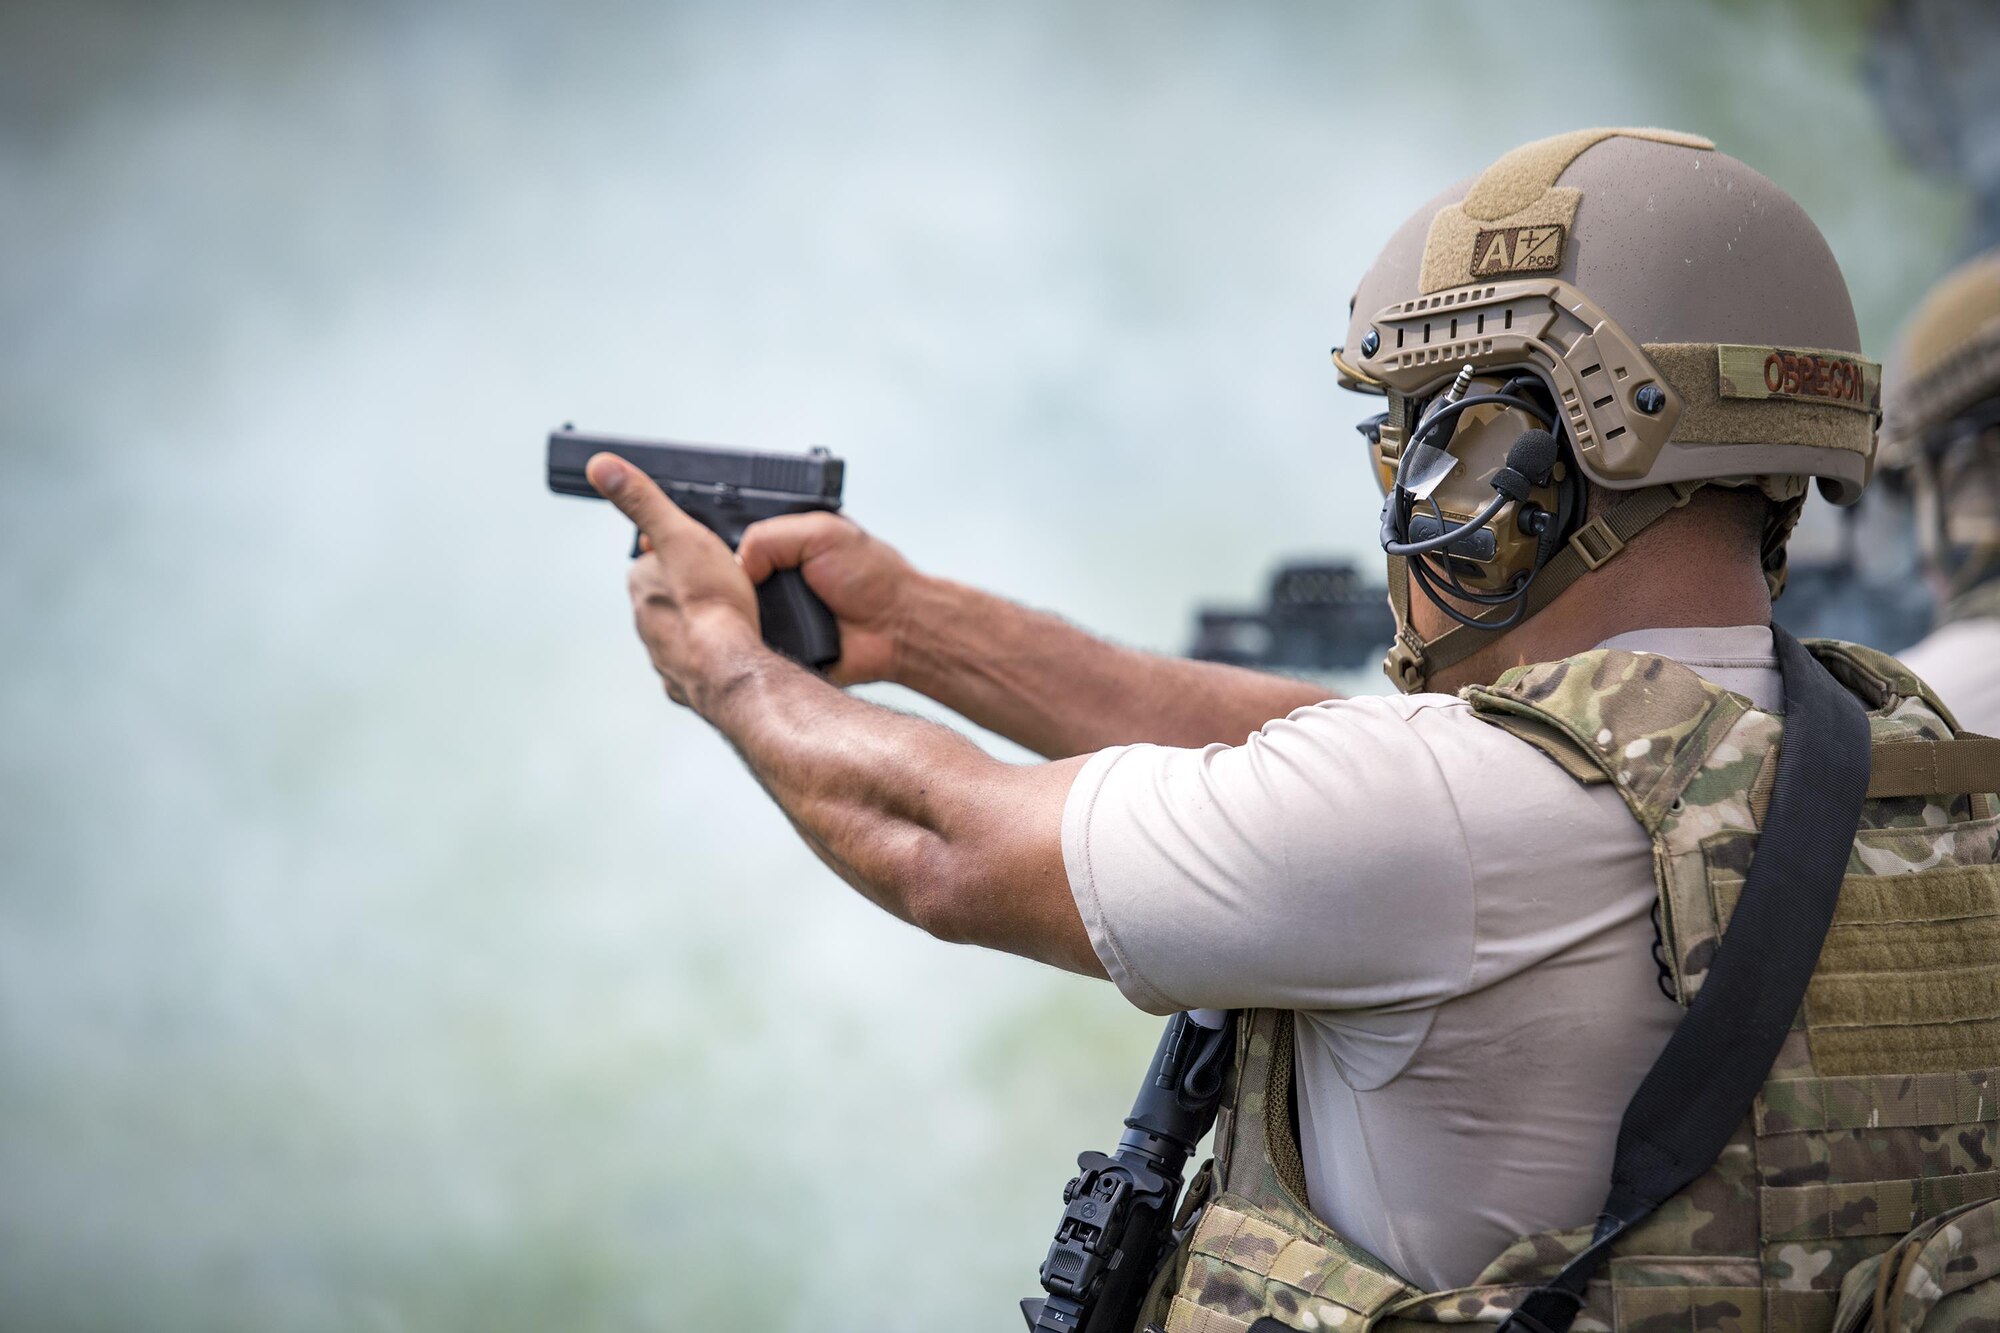 U.S. Air Force Tech. Sgt. Jose Obregon, 347th Operations Support Squadron independent duty medical technician-paramedic, moves through a scenario during a tactical combat casualty care course, Sept. 22, 2016, in Okeechobee, Fla. TCCC culminated with a large-scale ‘active-shooter' event, which required the participants to clear a large area of threats and evacuate multiple patients. (U.S. Air Force photo by Staff Sgt. Ryan Callaghan)